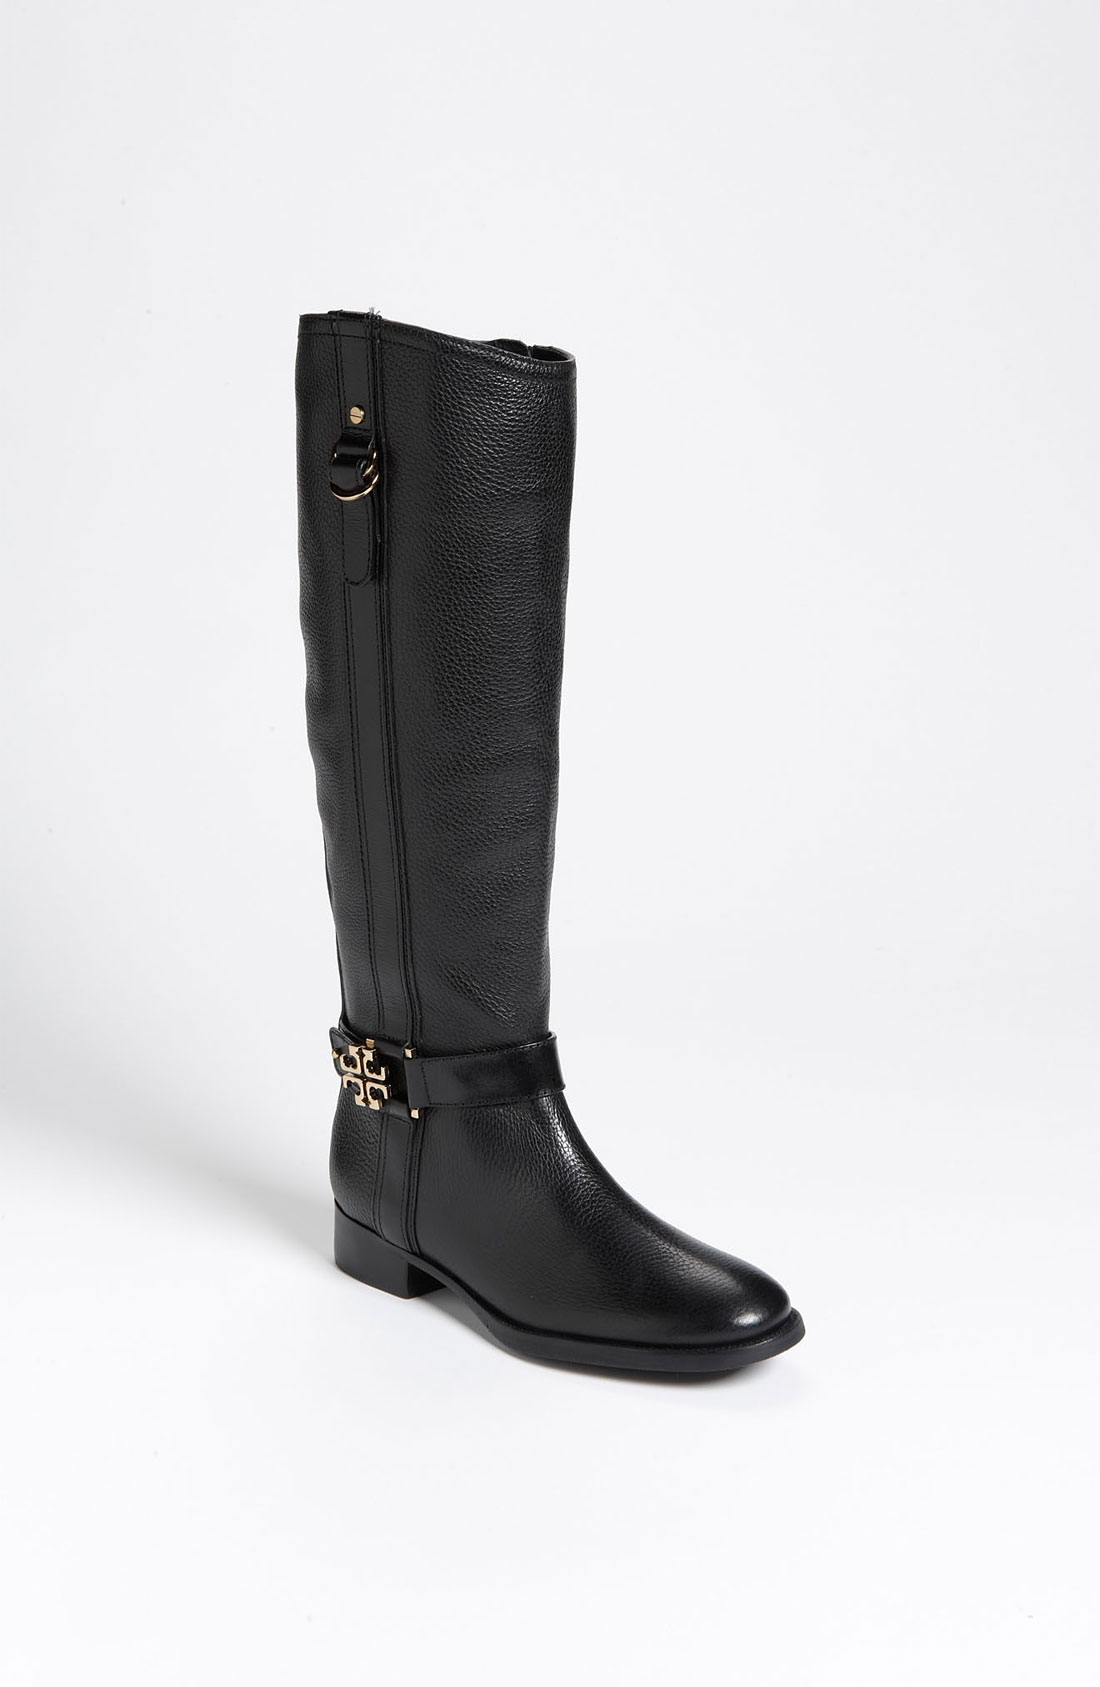 Tory Burch Elina Riding Boot in Black | Lyst